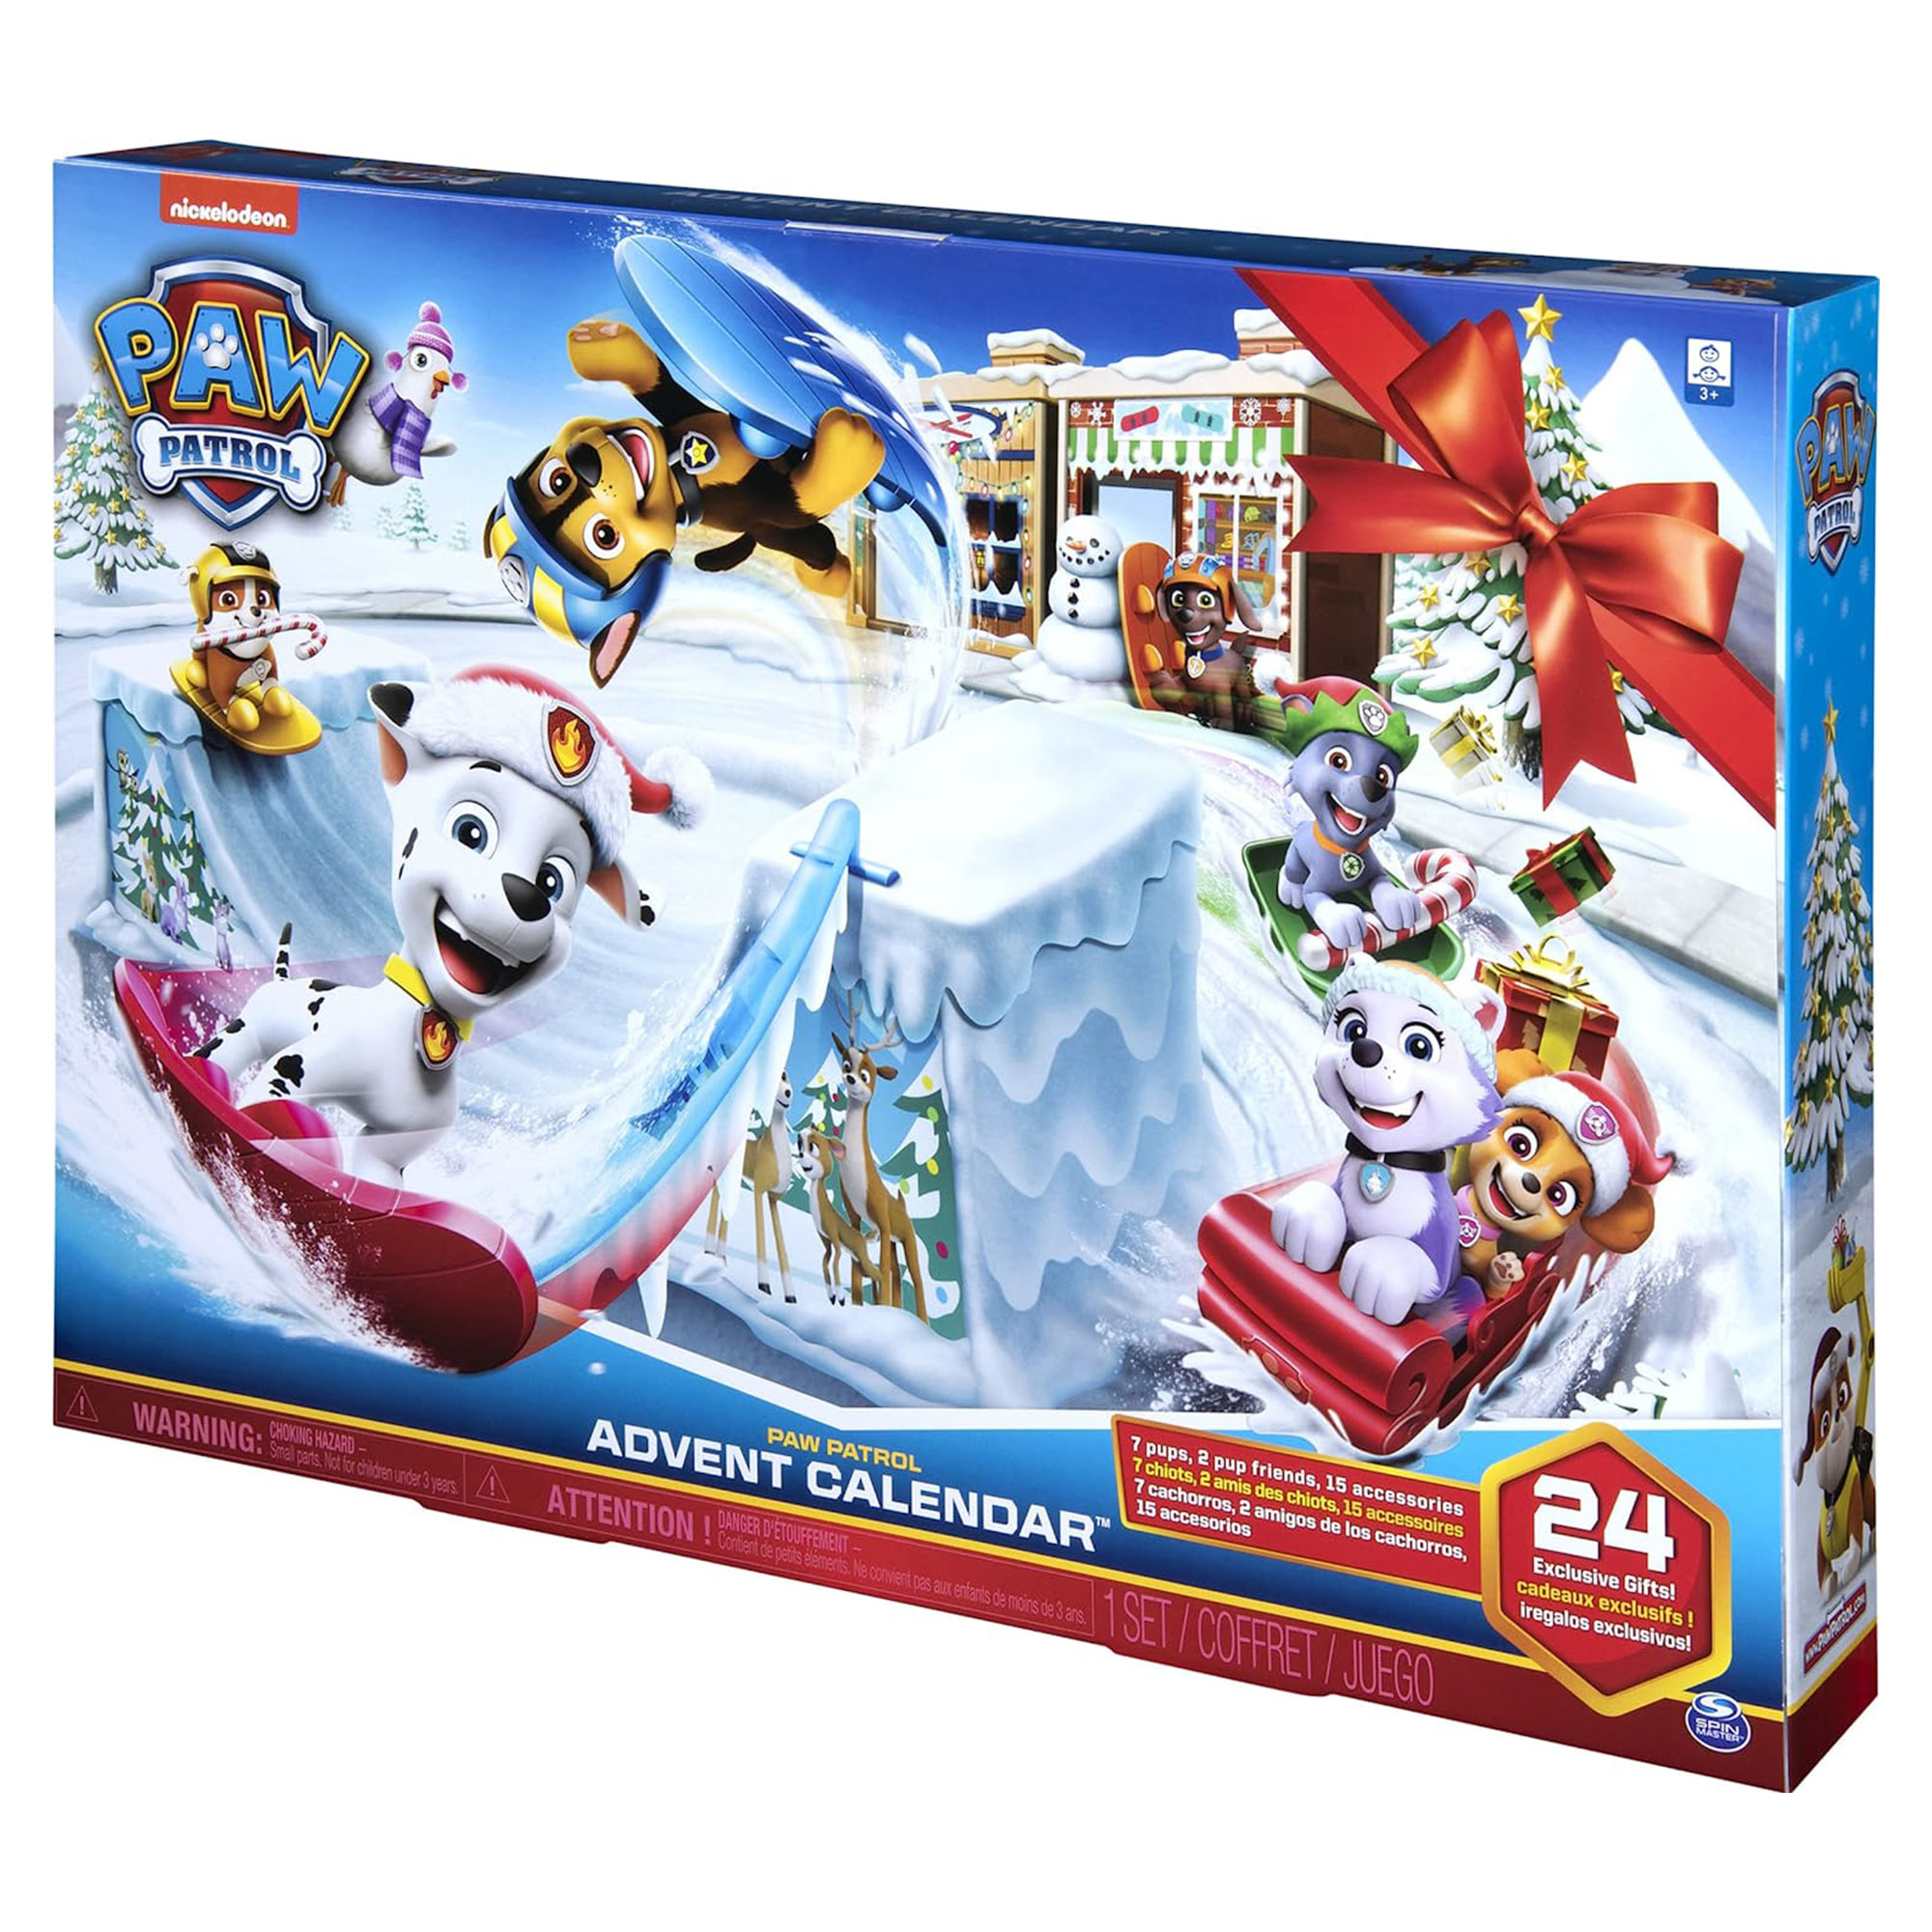 PAW Patrol Advent Calendar with 24 Collectible Toys for Kids Ages 3 & Up - image 1 of 6